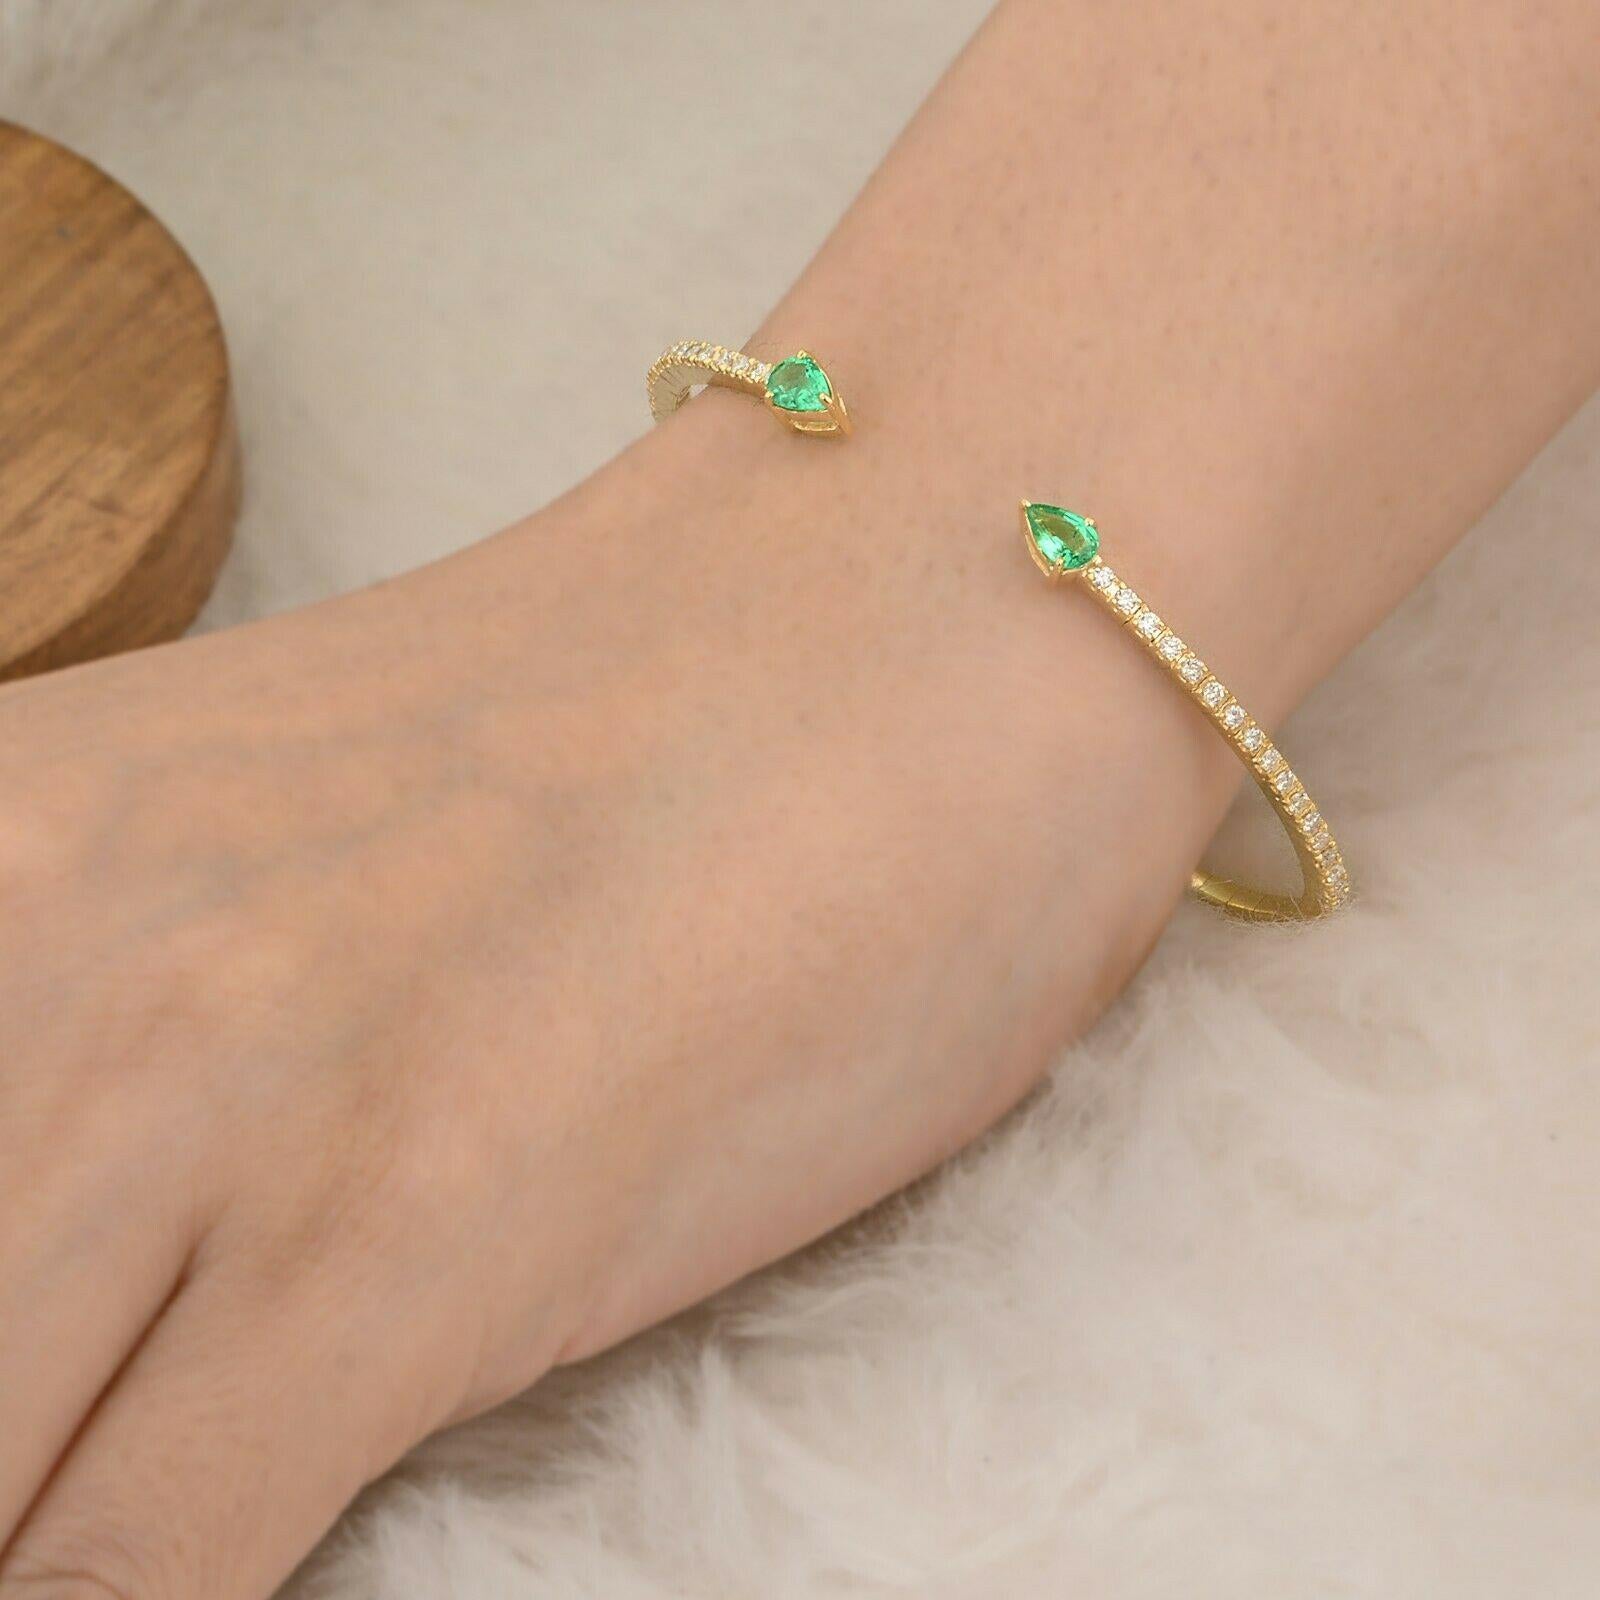 A stunning bracelet handmade in 14K yellow gold. It is hand set in .65 carats emerald and .51 carats of sparkling diamonds. Wear it alone or stack it with your favorite pieces.

FOLLOW MEGHNA JEWELS storefront to view the latest collection &